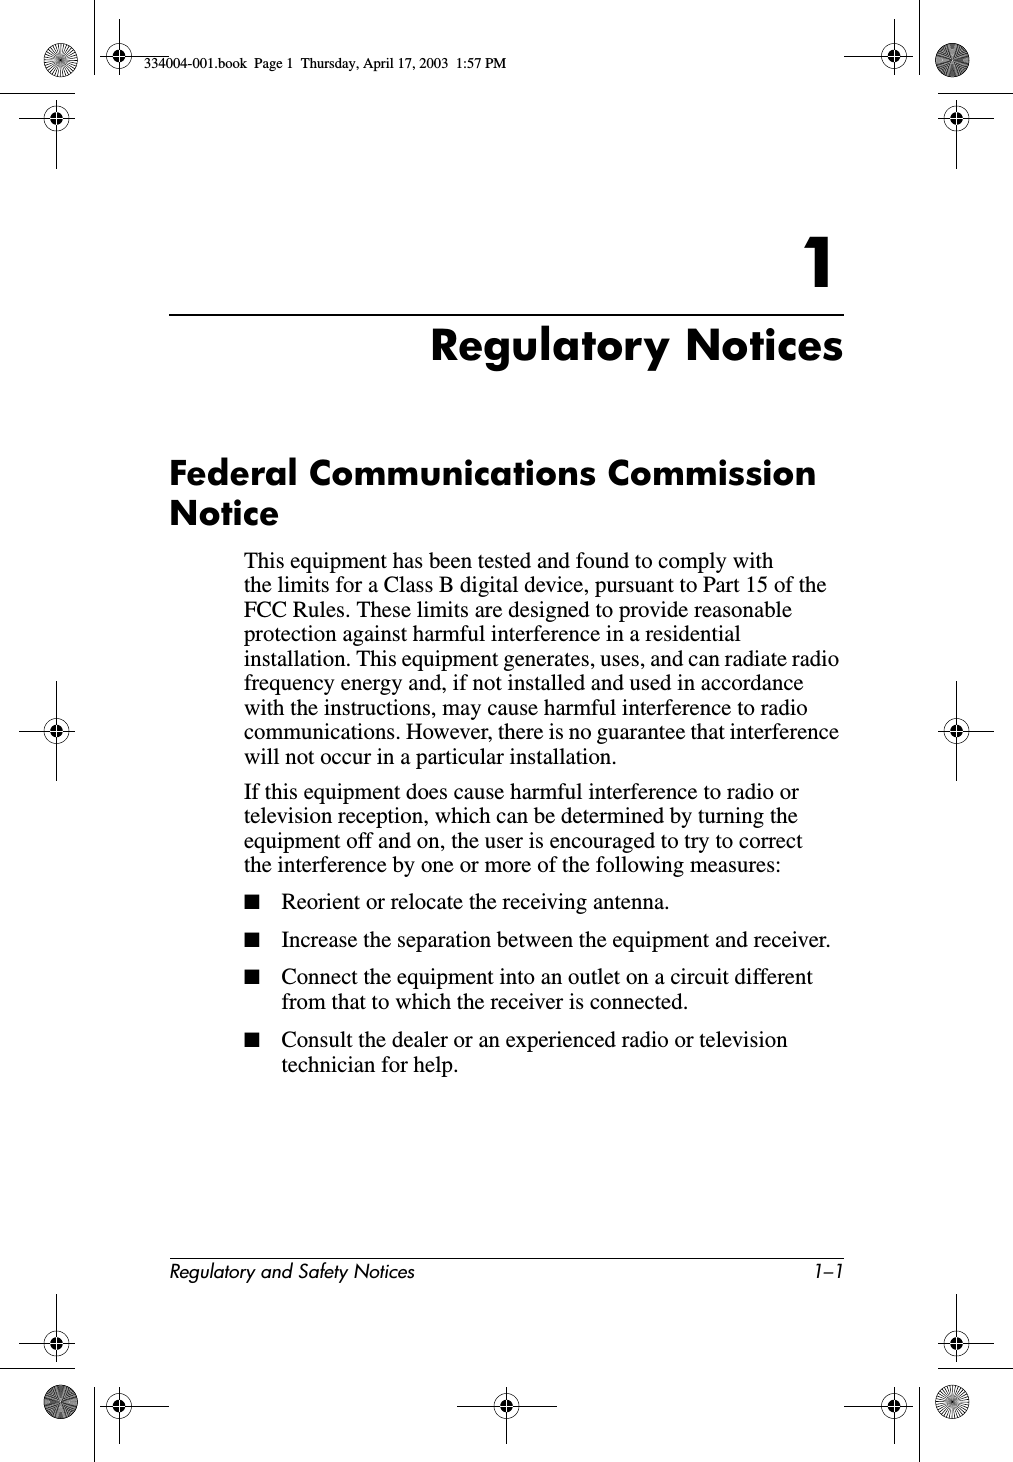 Regulatory and Safety Notices 1–11Regulatory NoticesFederal Communications Commission NoticeThis equipment has been tested and found to comply with the limits for a Class B digital device, pursuant to Part 15 of the FCC Rules. These limits are designed to provide reasonable protection against harmful interference in a residential installation. This equipment generates, uses, and can radiate radio frequency energy and, if not installed and used in accordance with the instructions, may cause harmful interference to radio communications. However, there is no guarantee that interference will not occur in a particular installation.If this equipment does cause harmful interference to radio or television reception, which can be determined by turning the equipment off and on, the user is encouraged to try to correct the interference by one or more of the following measures:■Reorient or relocate the receiving antenna.■Increase the separation between the equipment and receiver.■Connect the equipment into an outlet on a circuit different from that to which the receiver is connected.■Consult the dealer or an experienced radio or television technician for help.334004-001.book  Page 1  Thursday, April 17, 2003  1:57 PM